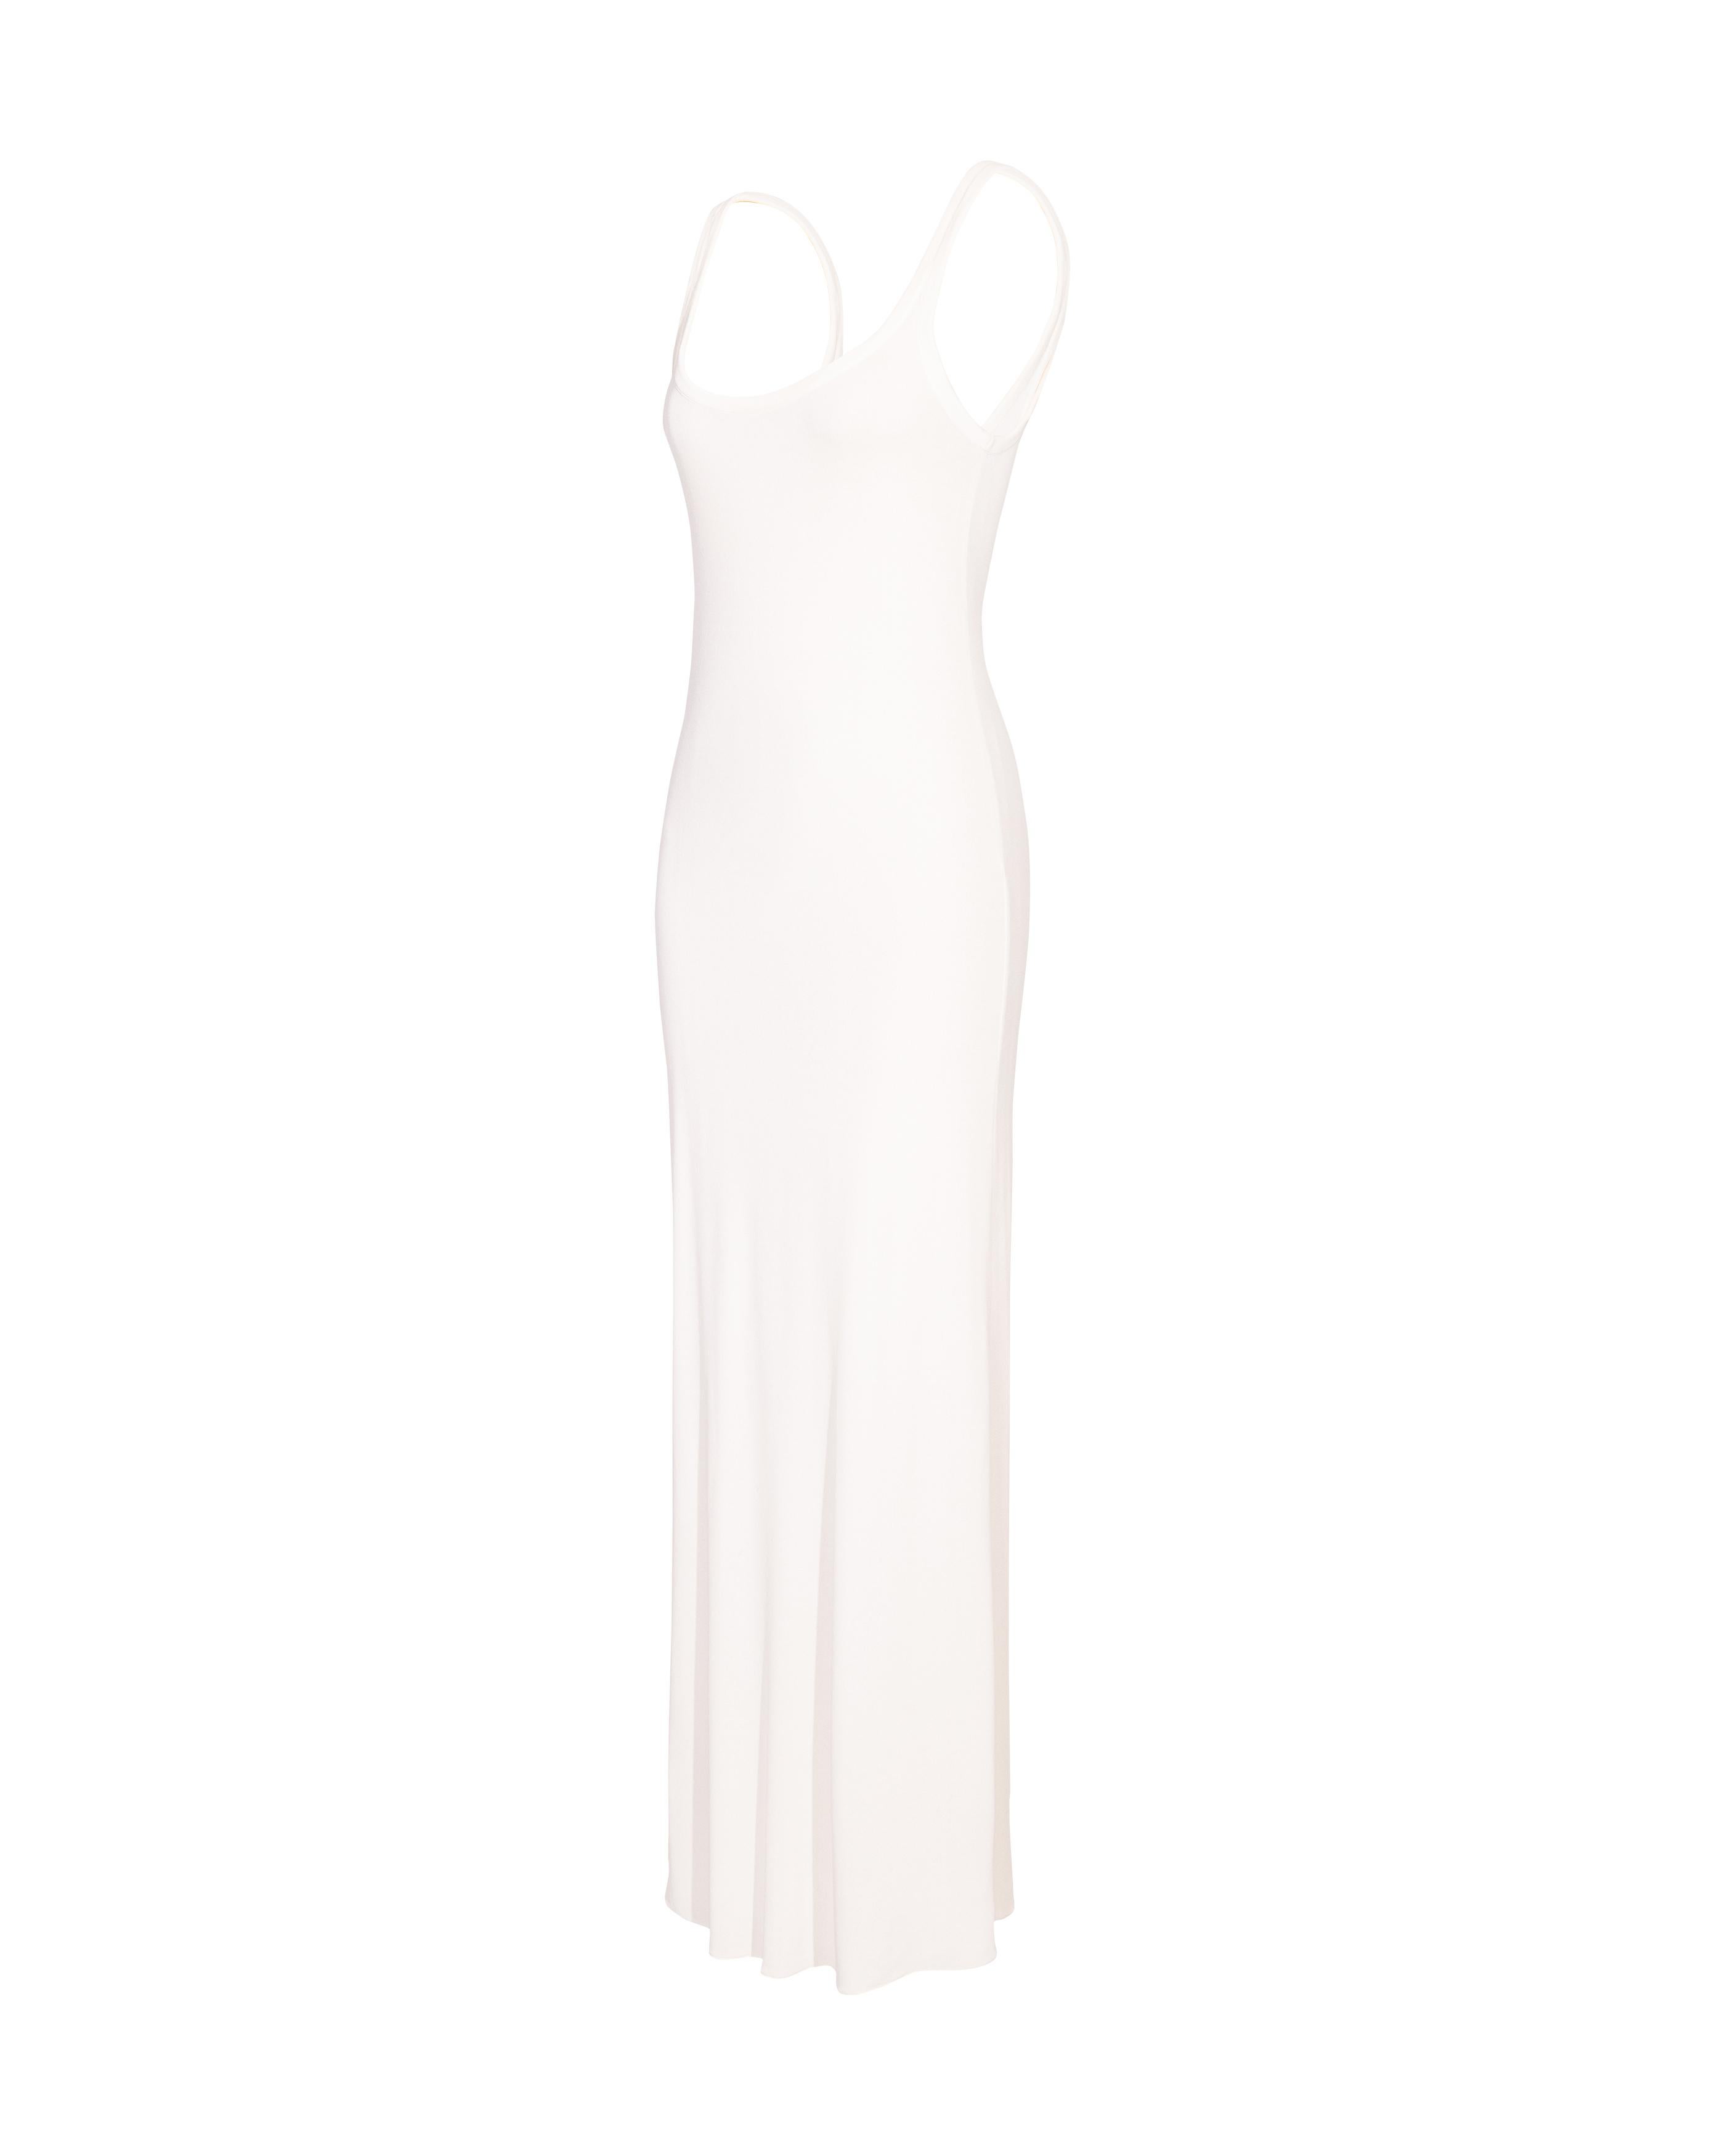 S/S 1994 Calvin Klein White Scoop Neck Maxi Dress In Excellent Condition In North Hollywood, CA